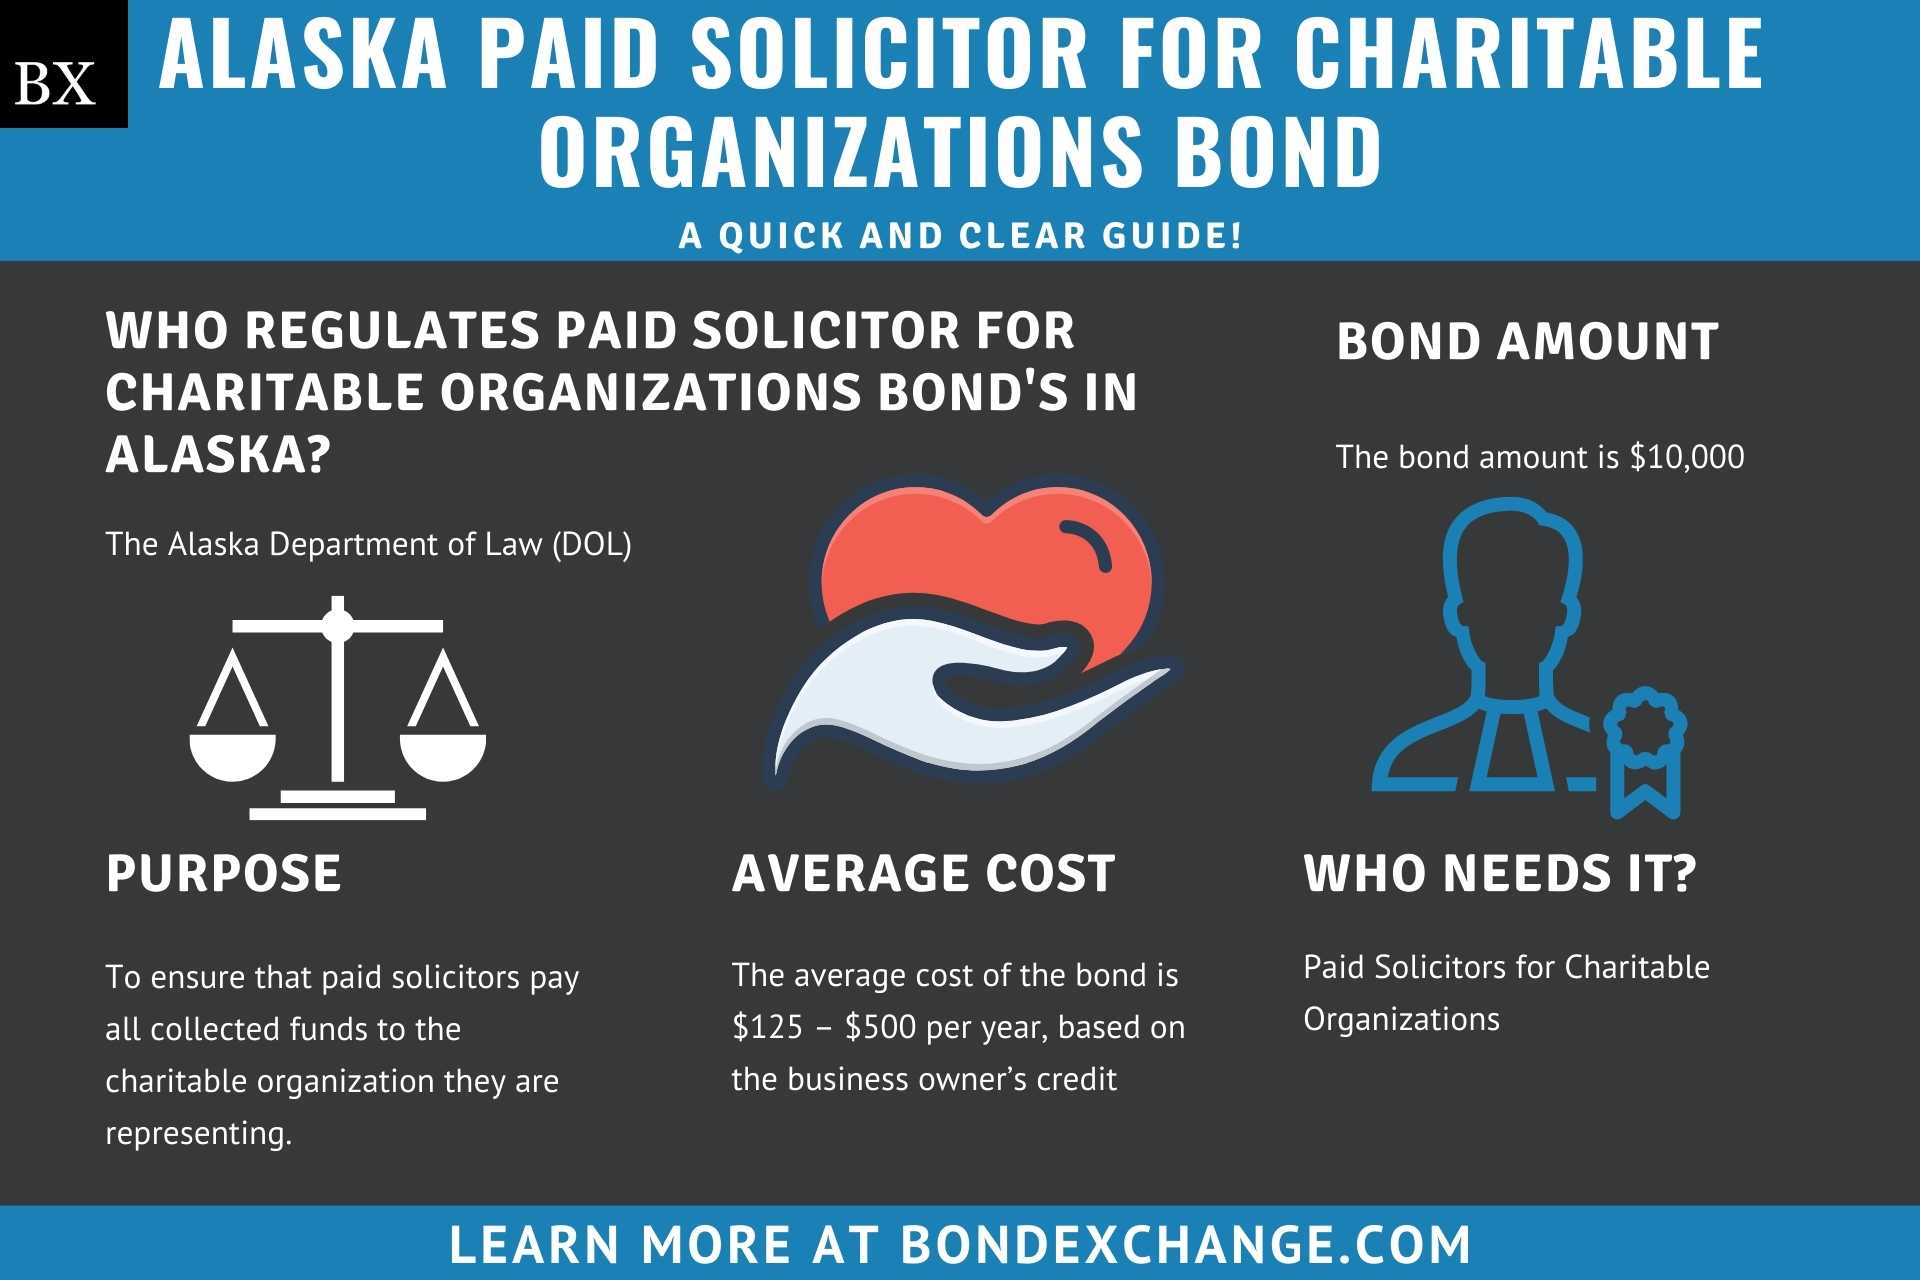 Alaska Paid Solicitor for Charitable Organizations Bond